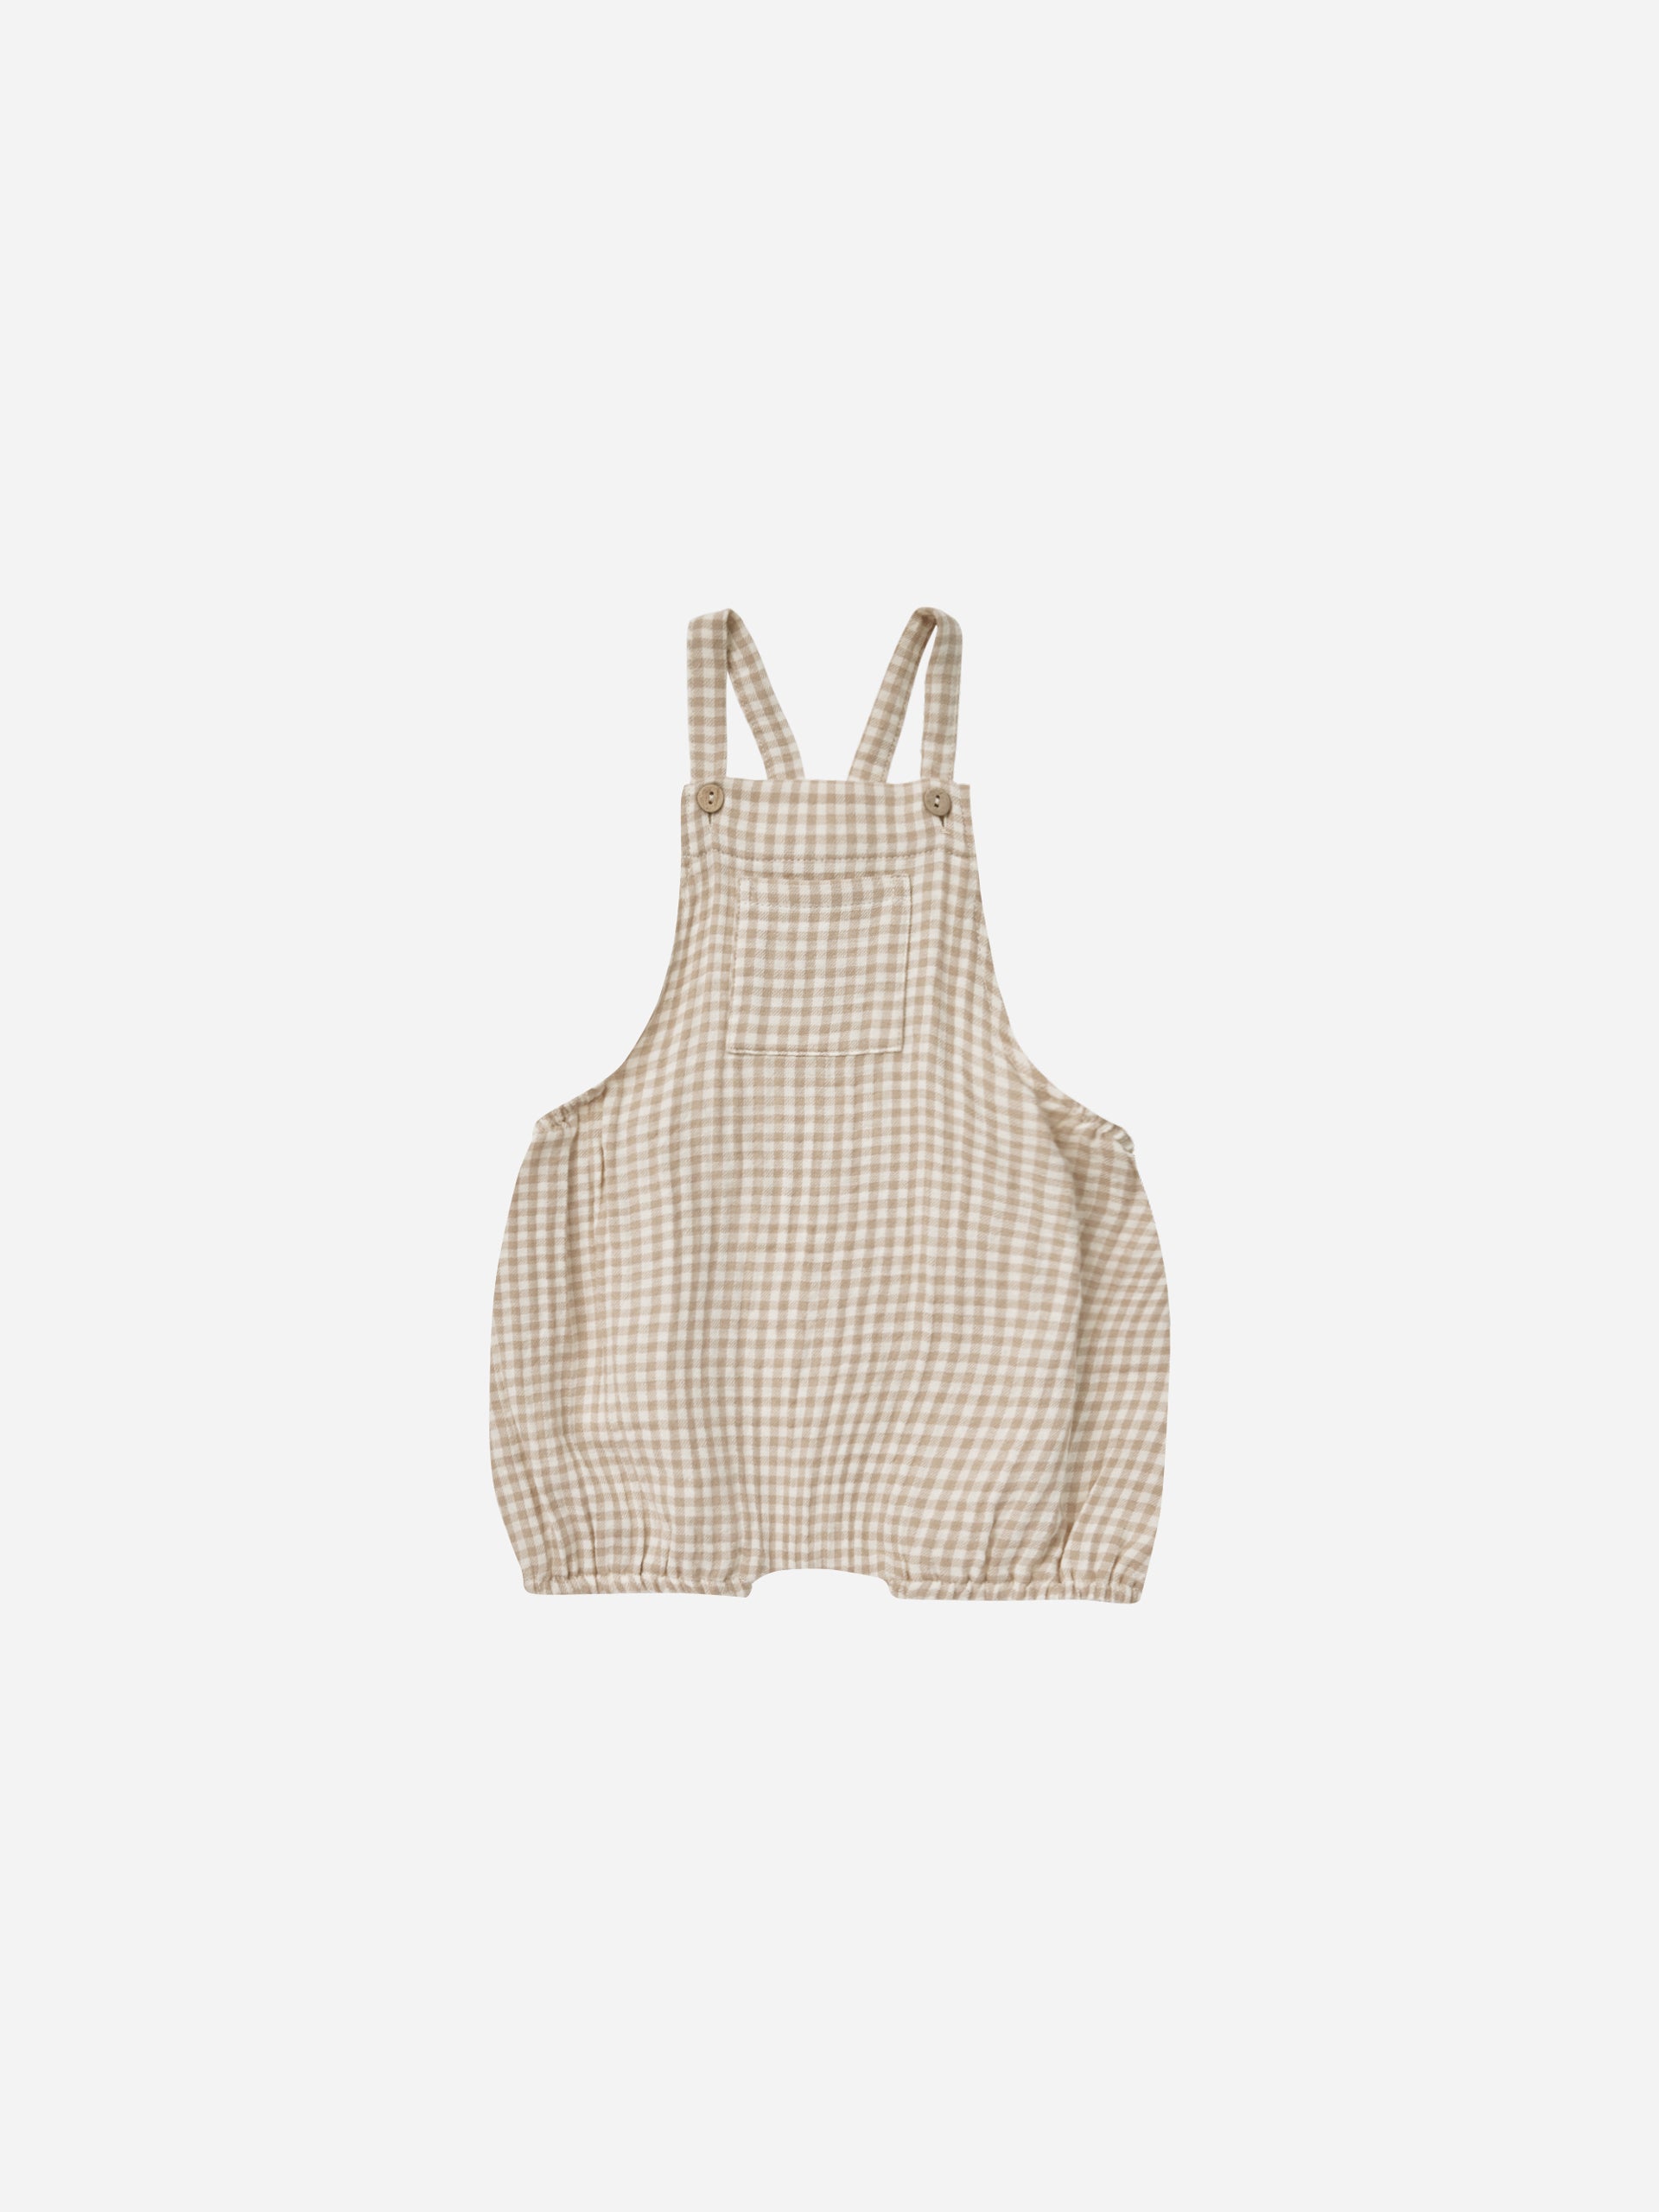 Hayes Romper || Oat Gingham - Rylee + Cru | Kids Clothes | Trendy Baby Clothes | Modern Infant Outfits |